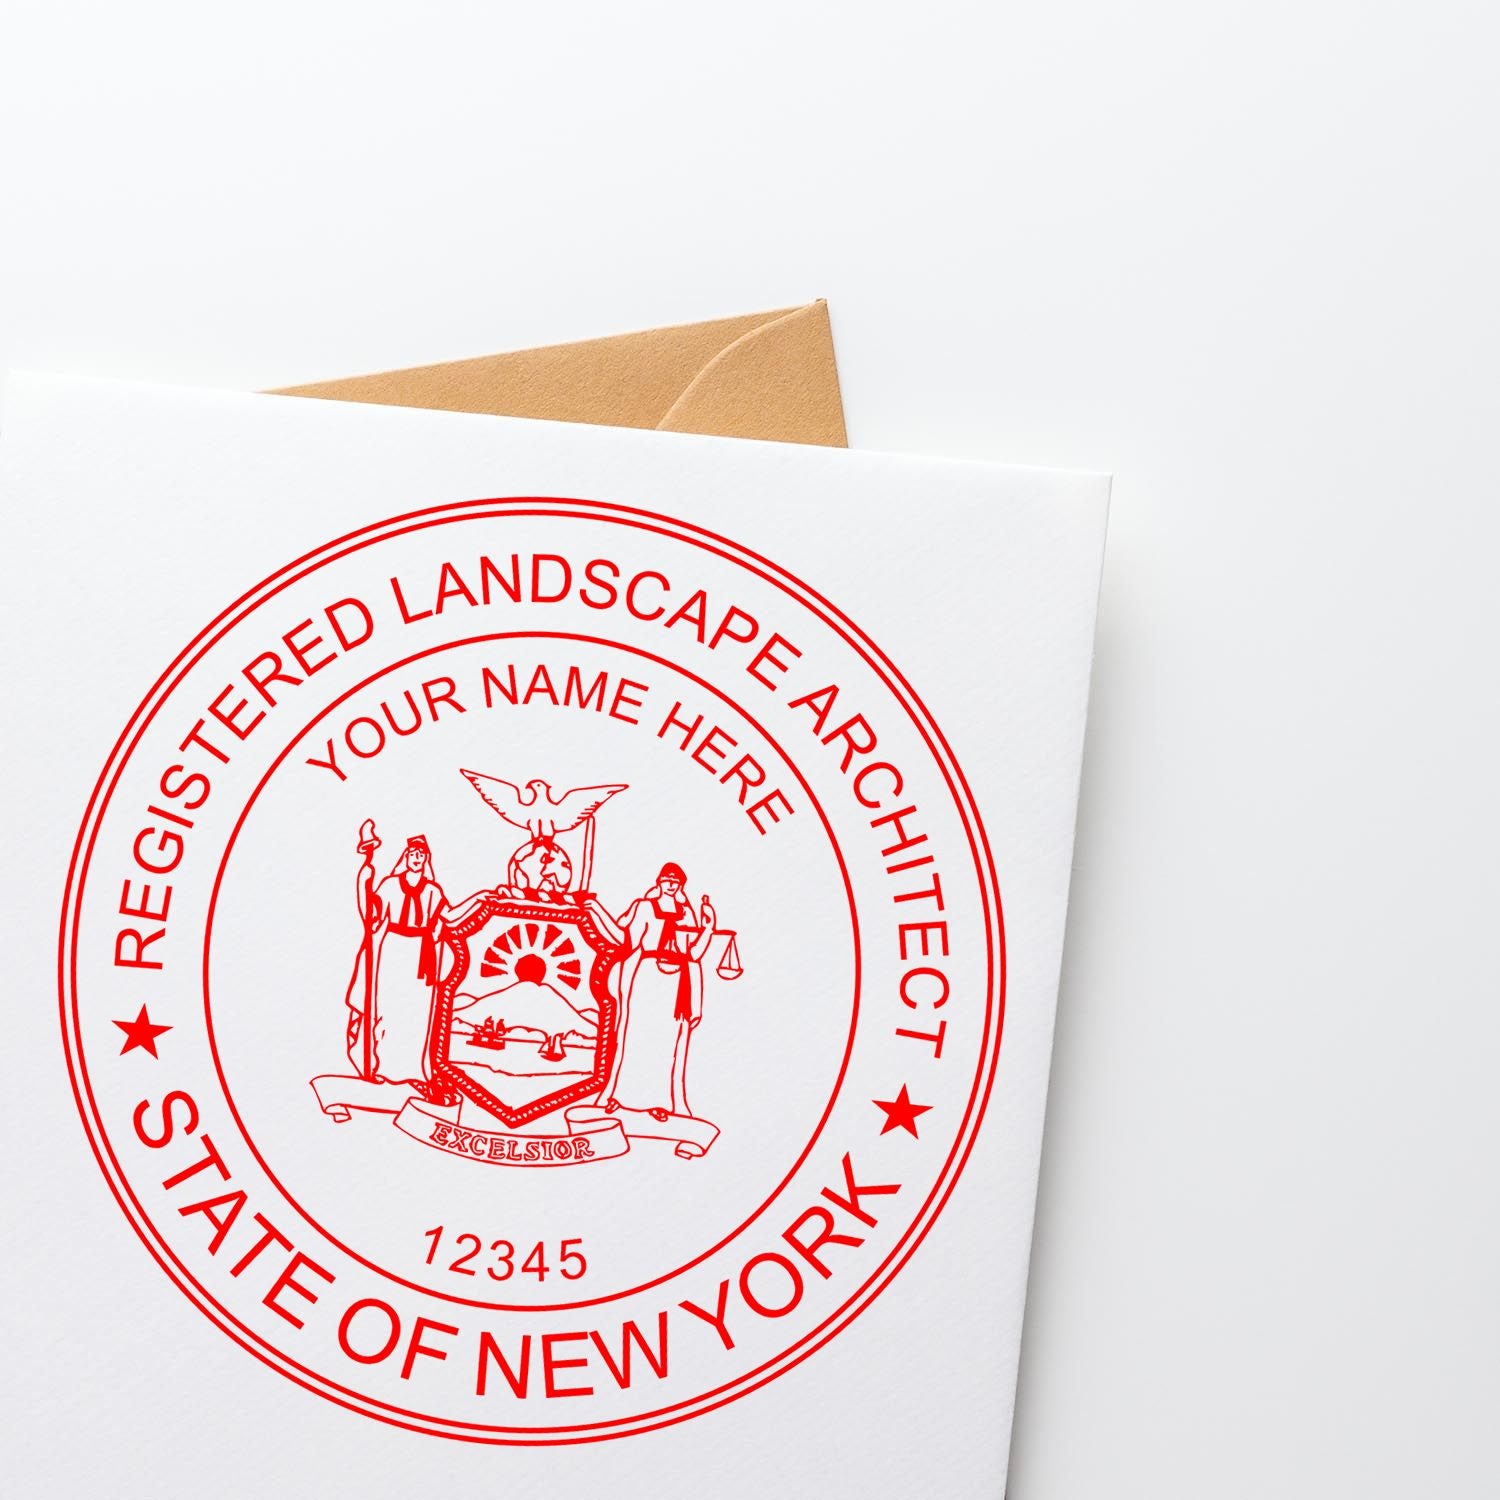 A stamped impression of the Self-Inking New York Landscape Architect Stamp in this stylish lifestyle photo, setting the tone for a unique and personalized product.